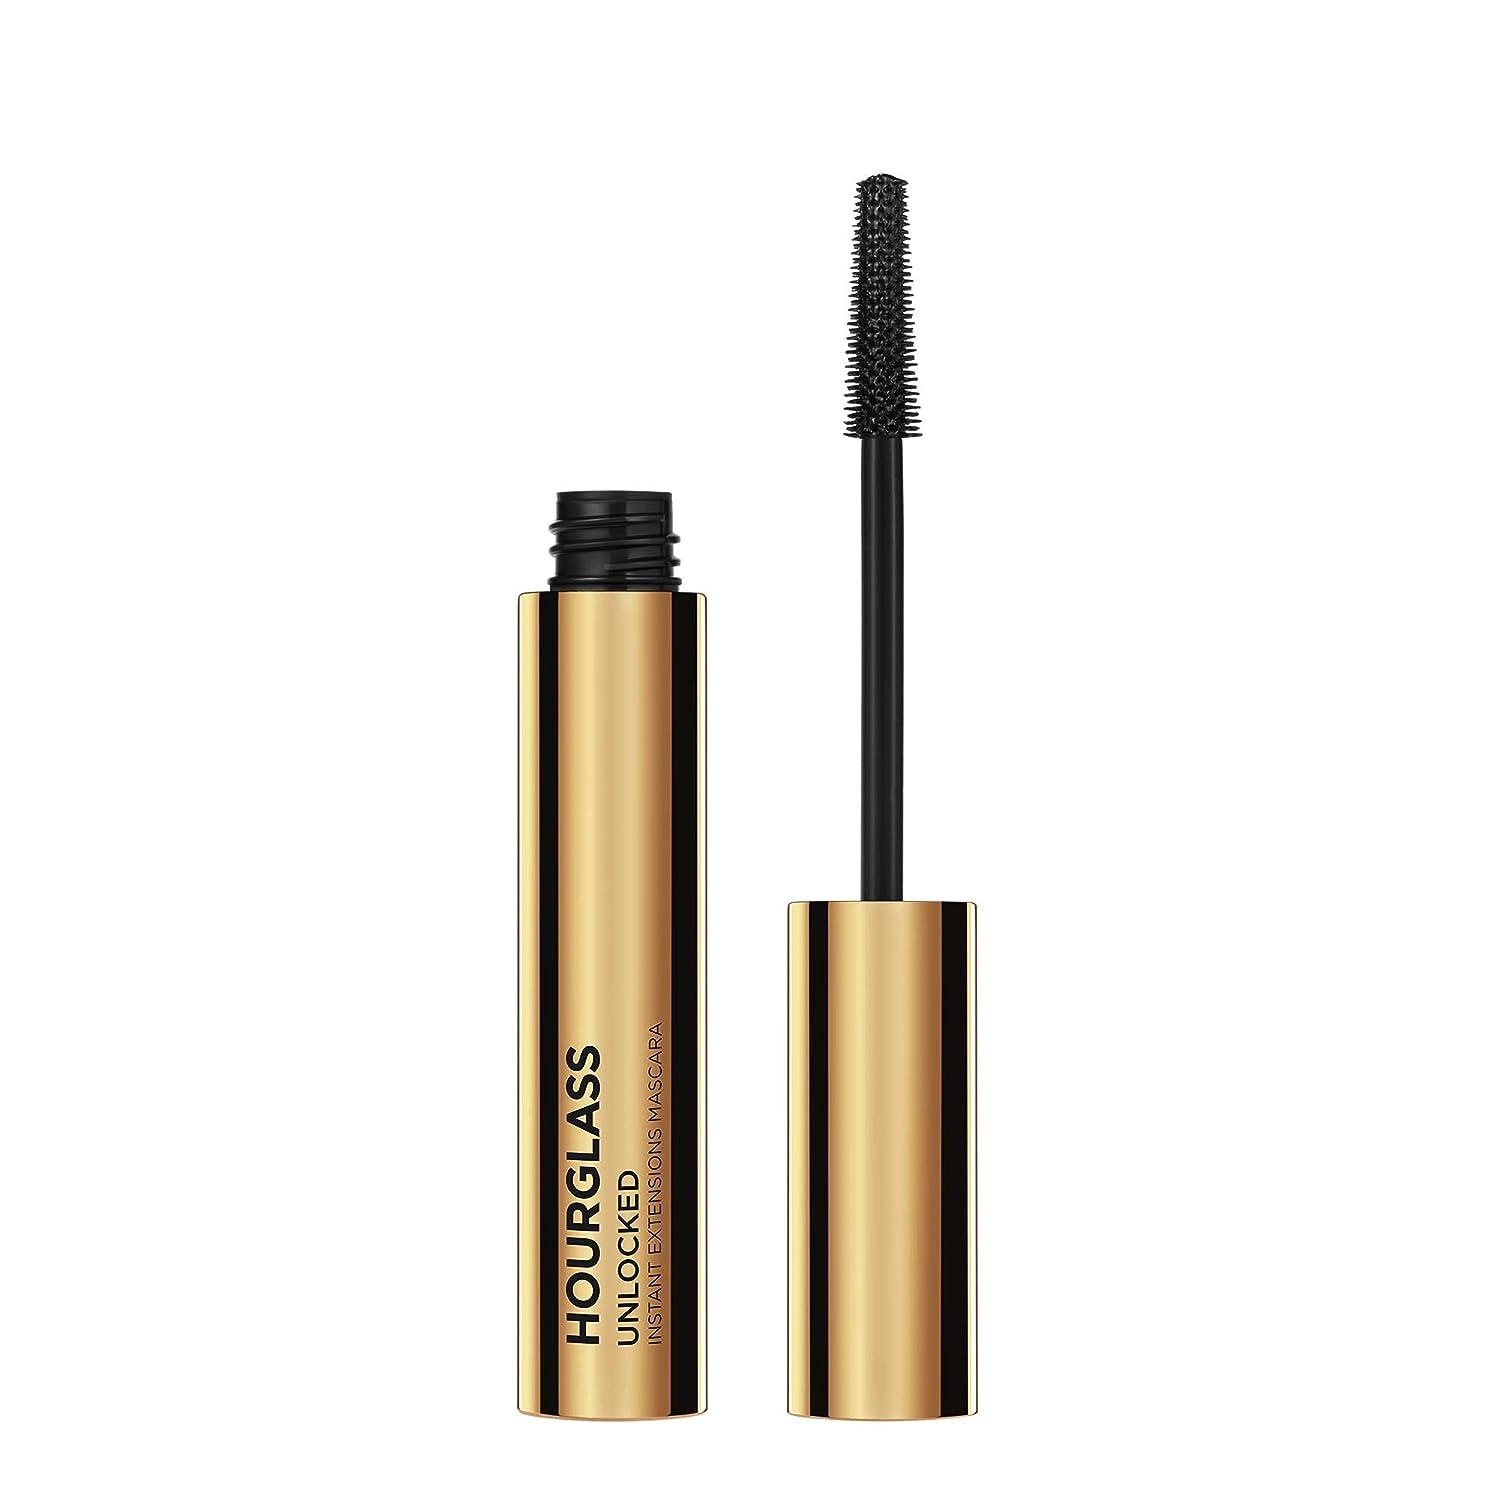 Hourglass Unlocked Instant Extensions Mascara is an innovative mascara excels at reaching each individual lash from the root, delivering a flawless application of an even film.